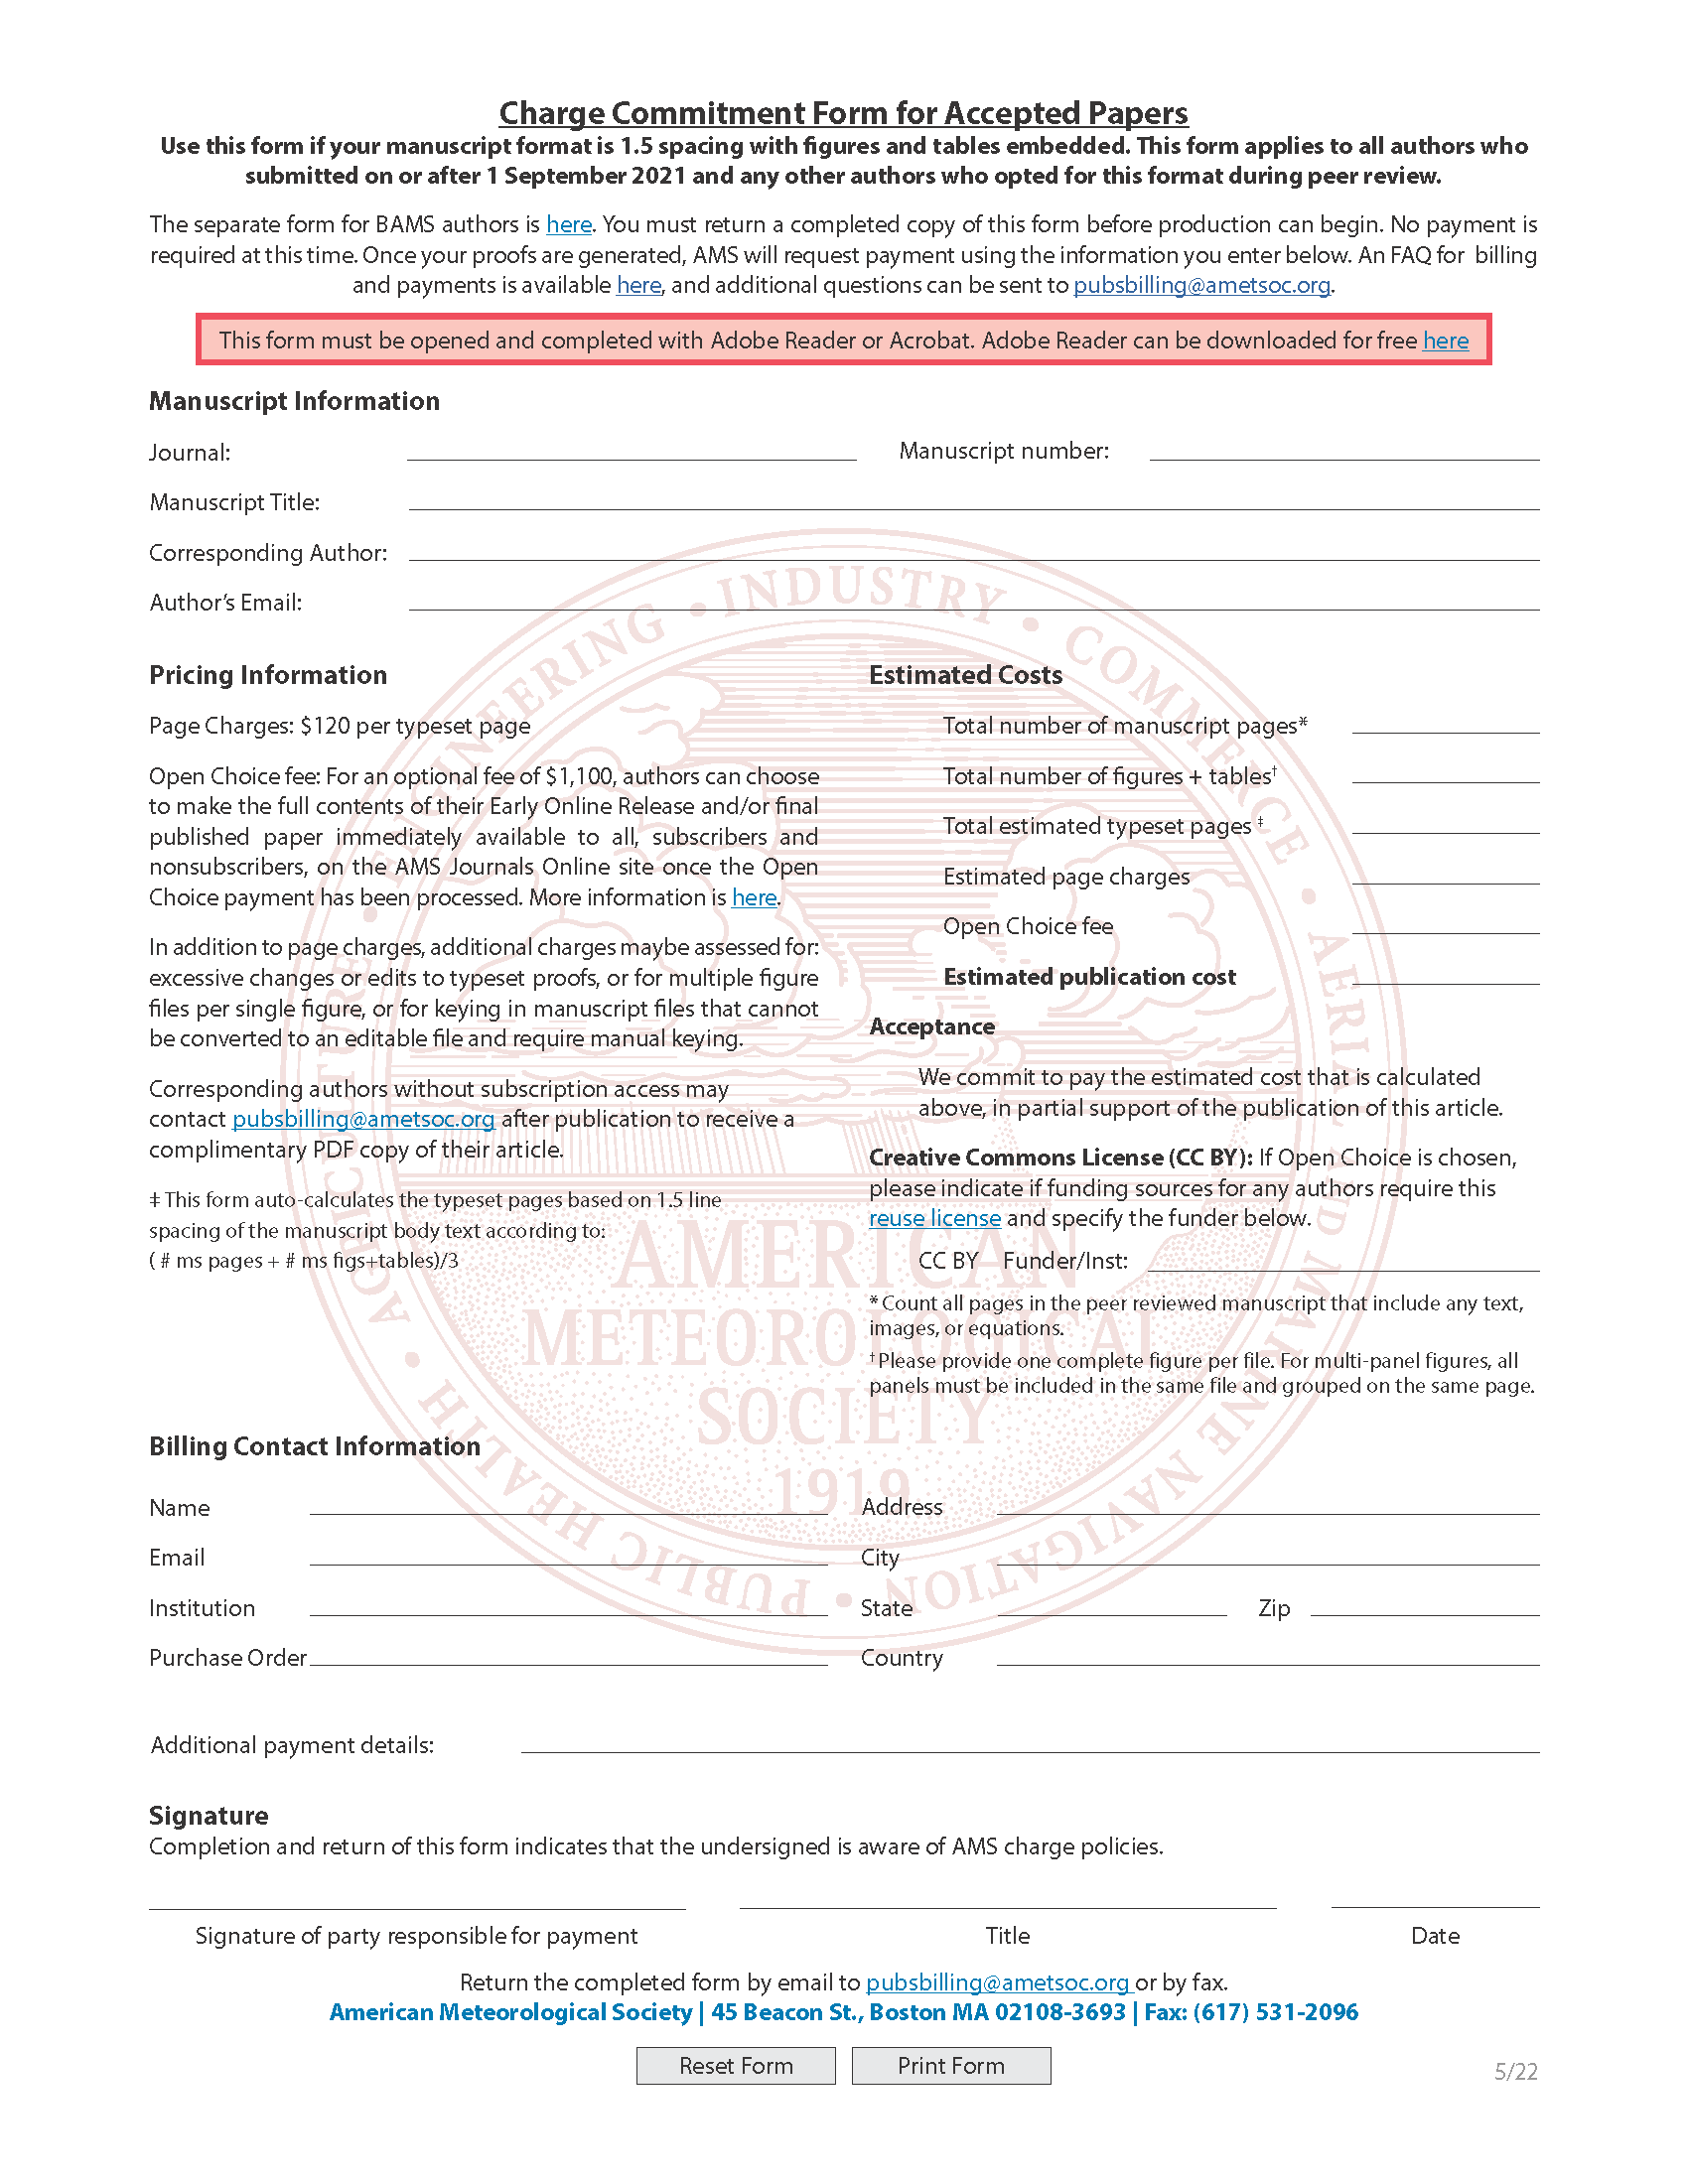 Download the Page Charge Form as a PDF